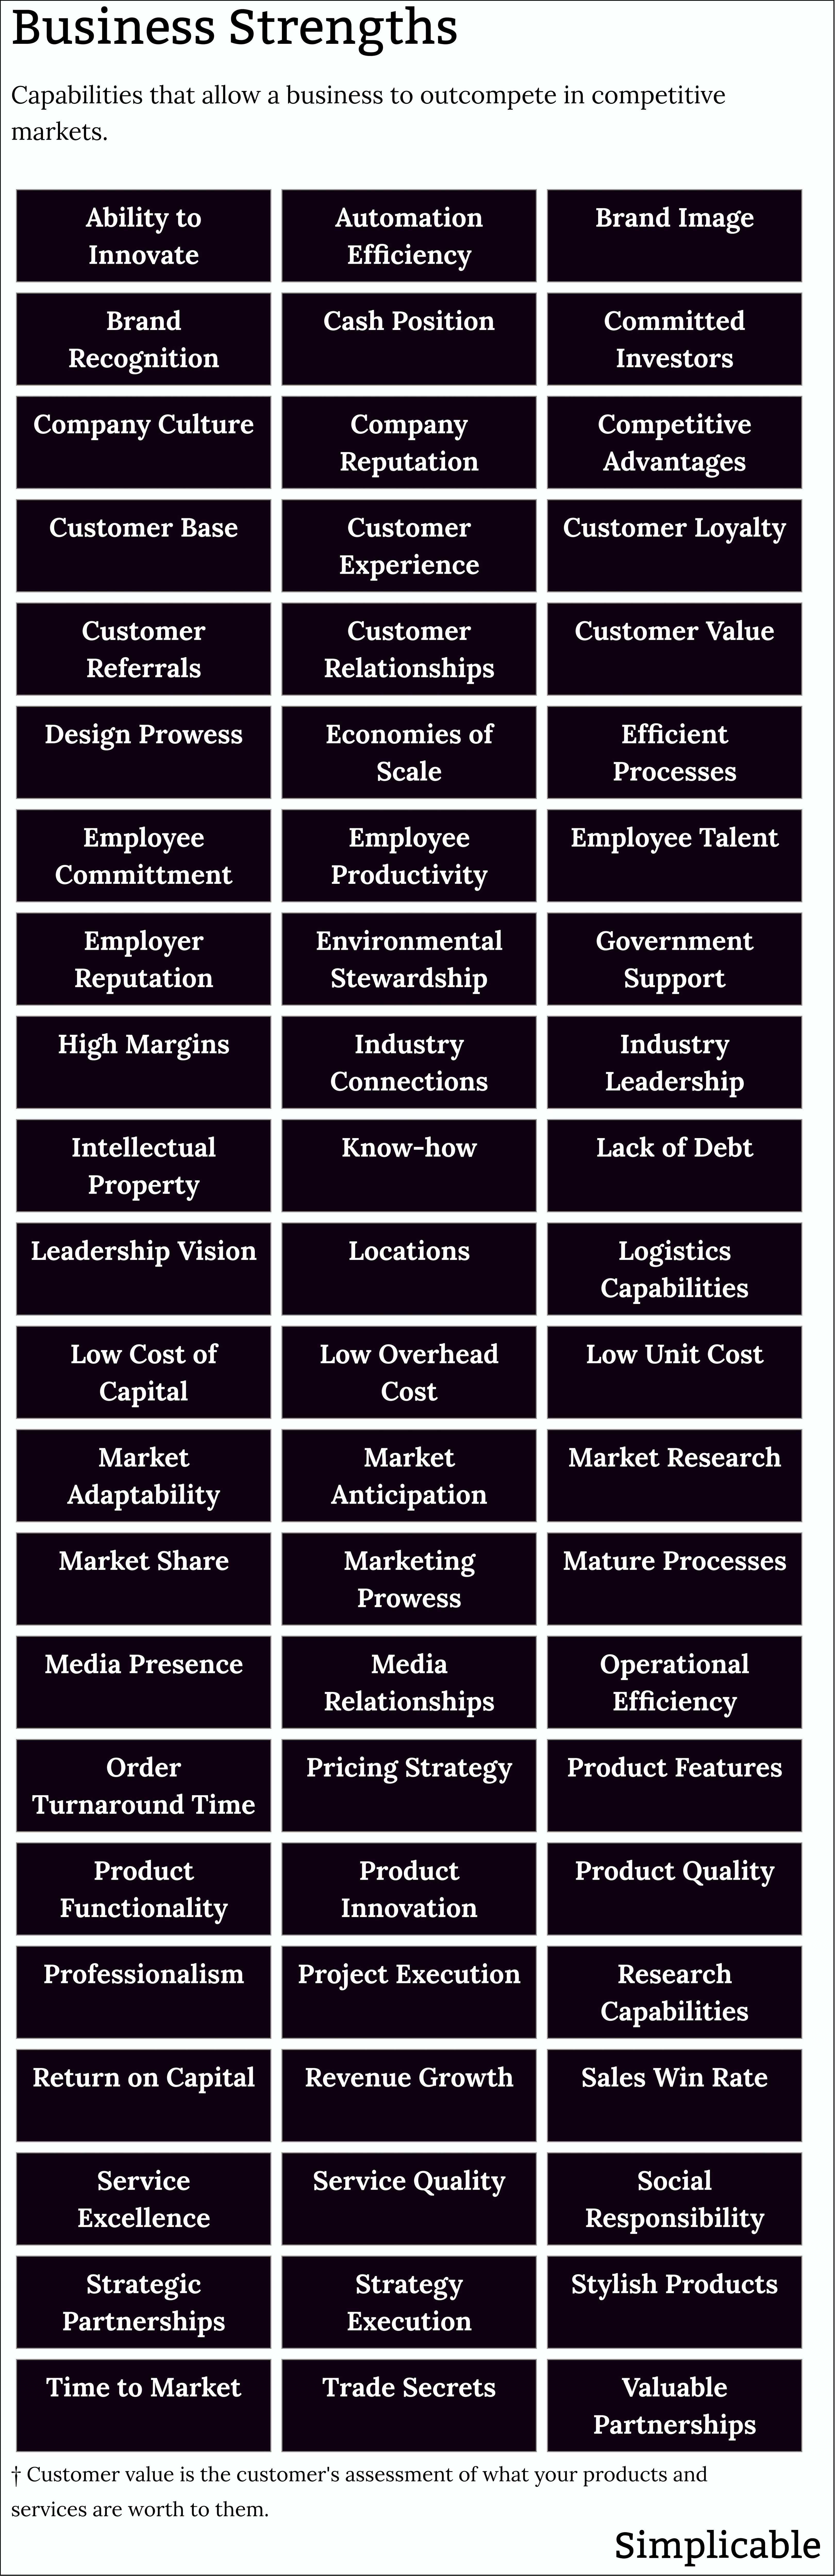 examples of business strengths